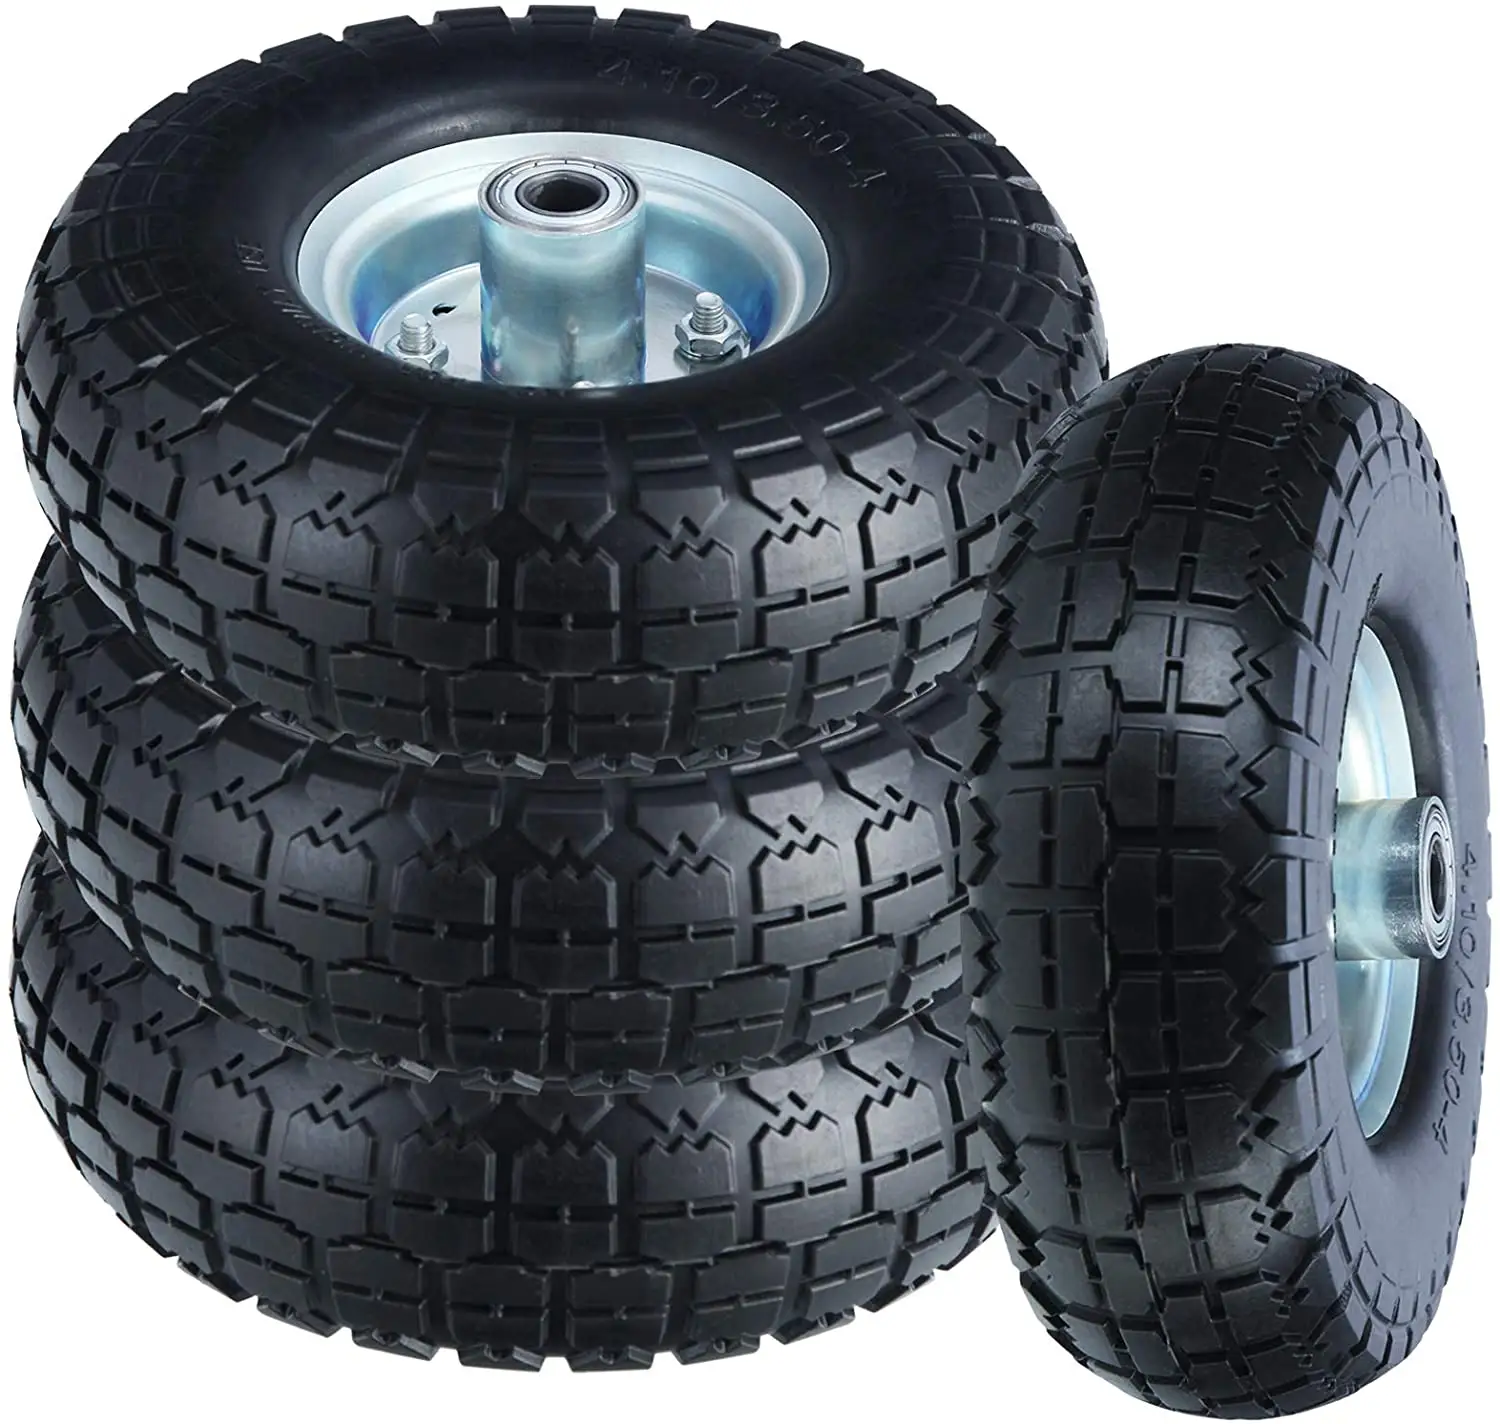 10" Flat Free Tires Solid Rubber Tyre Wheels,4.10/3.50-4 Air Less Tires Wheels with 5/8" Center Bearings,for Hand Truck/Trolley